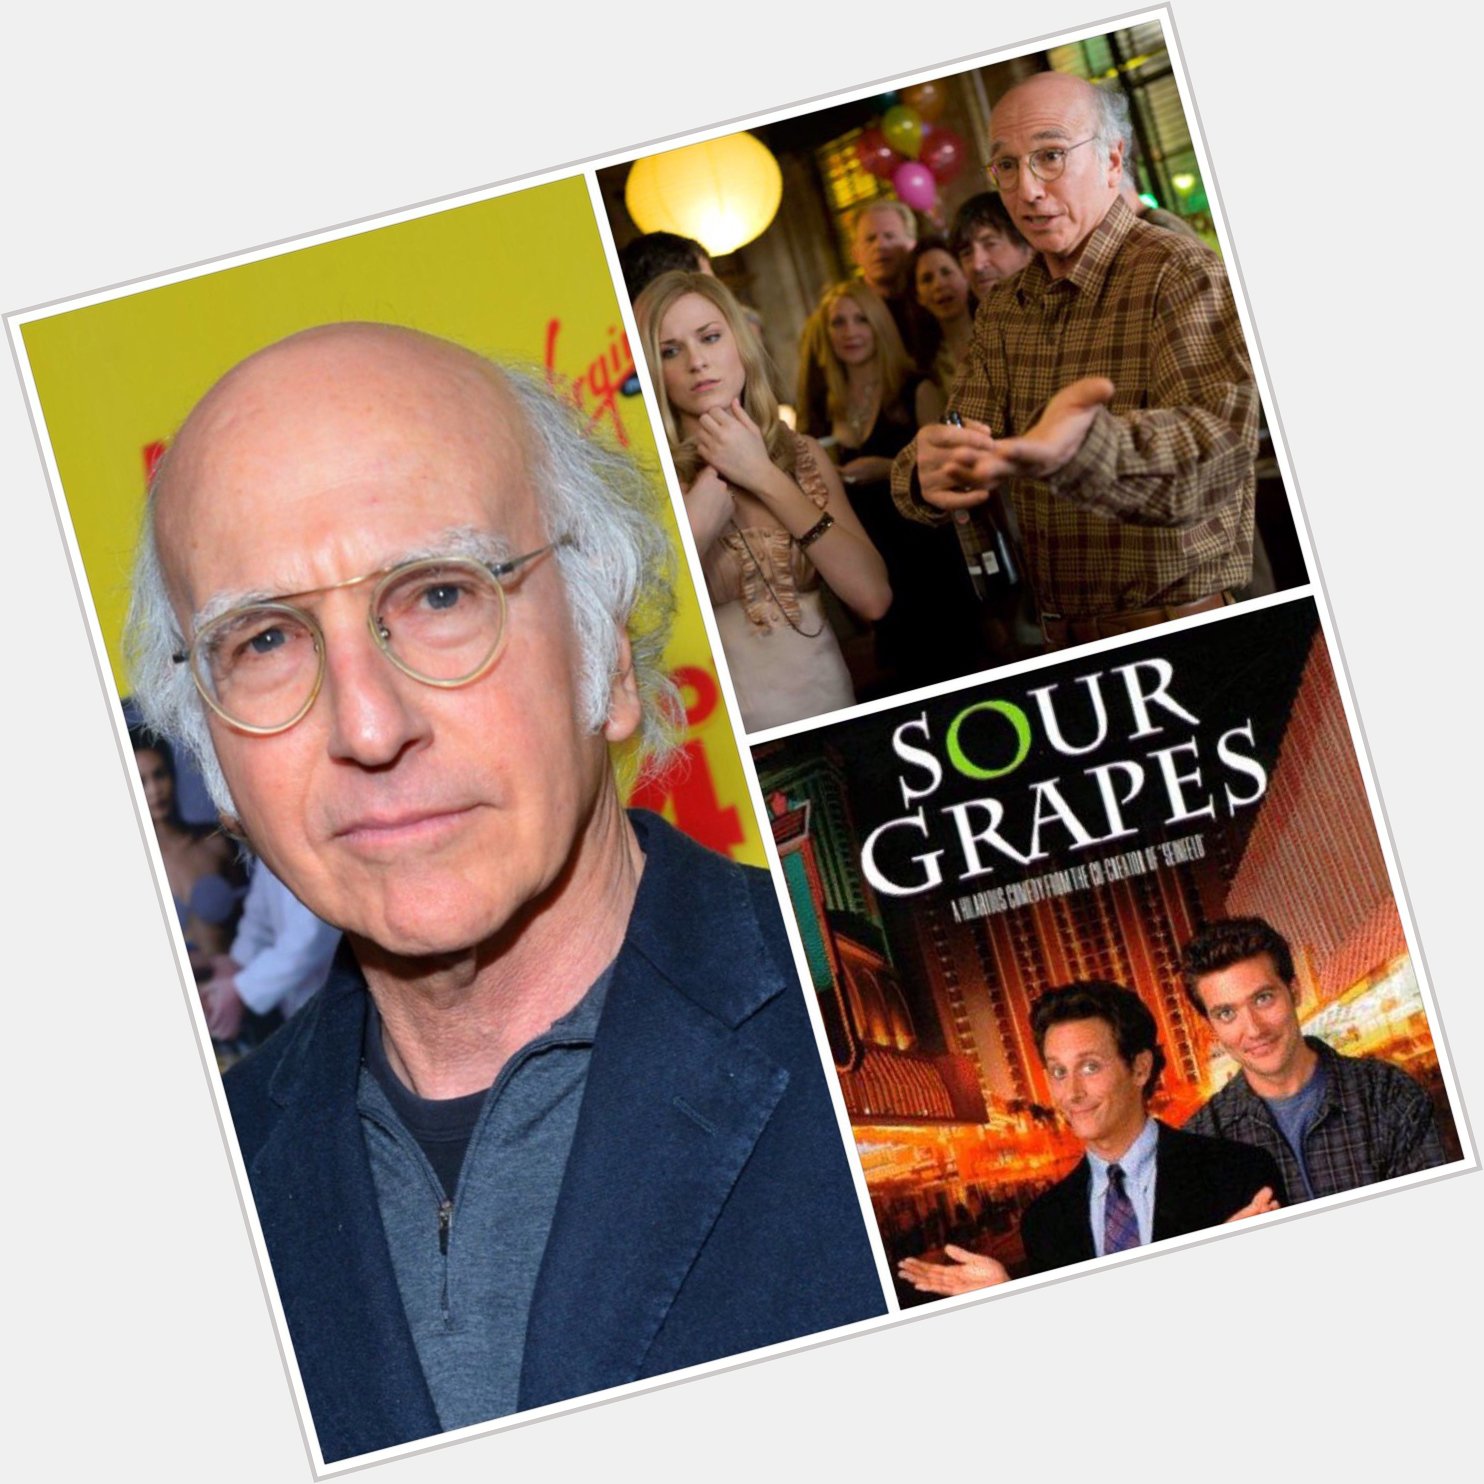  Happy 70th birthday to actor/writer/producer Larry David! In film: 